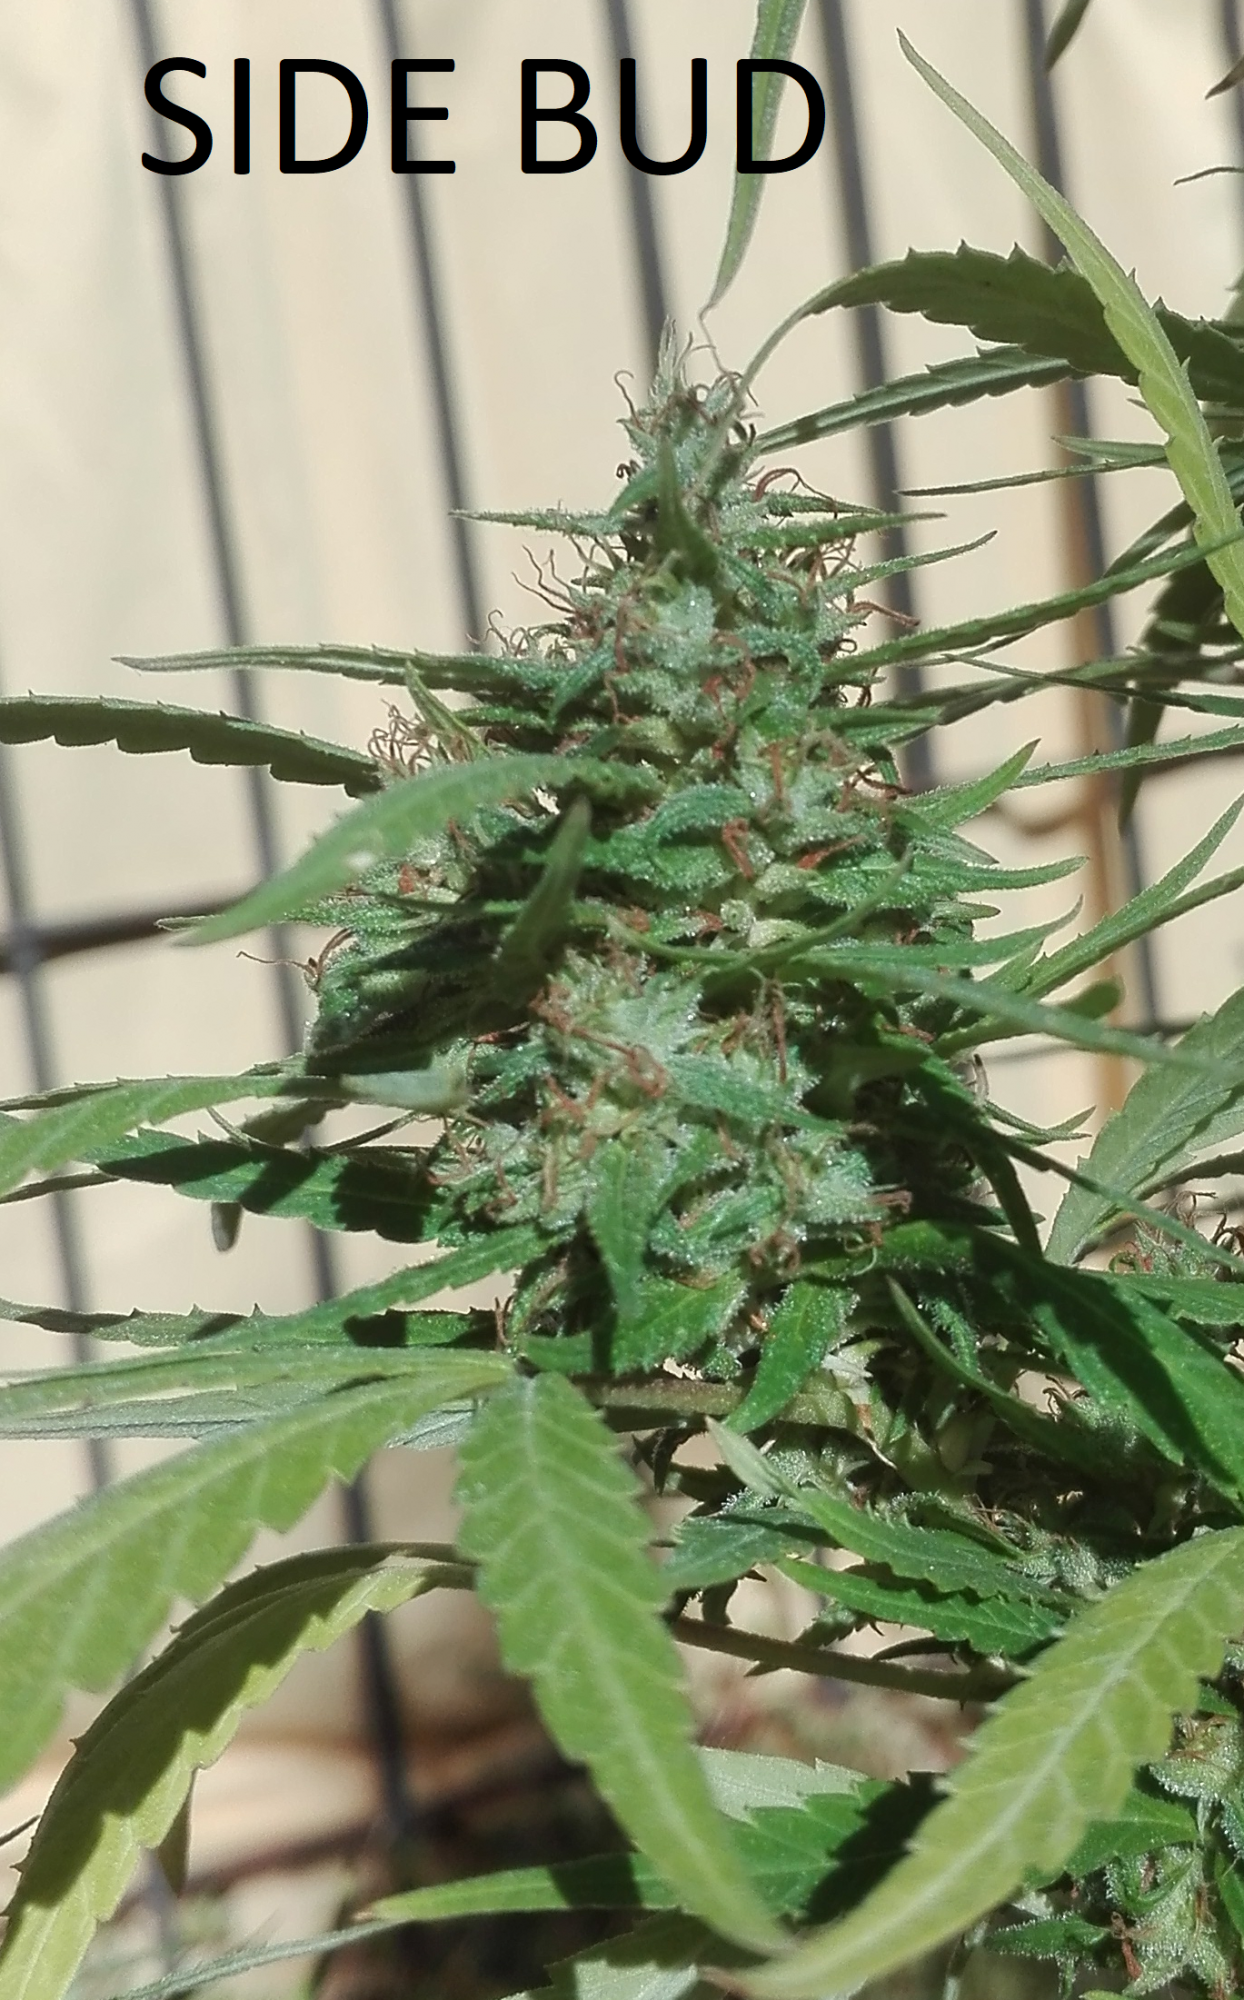 New grower   question harvest time